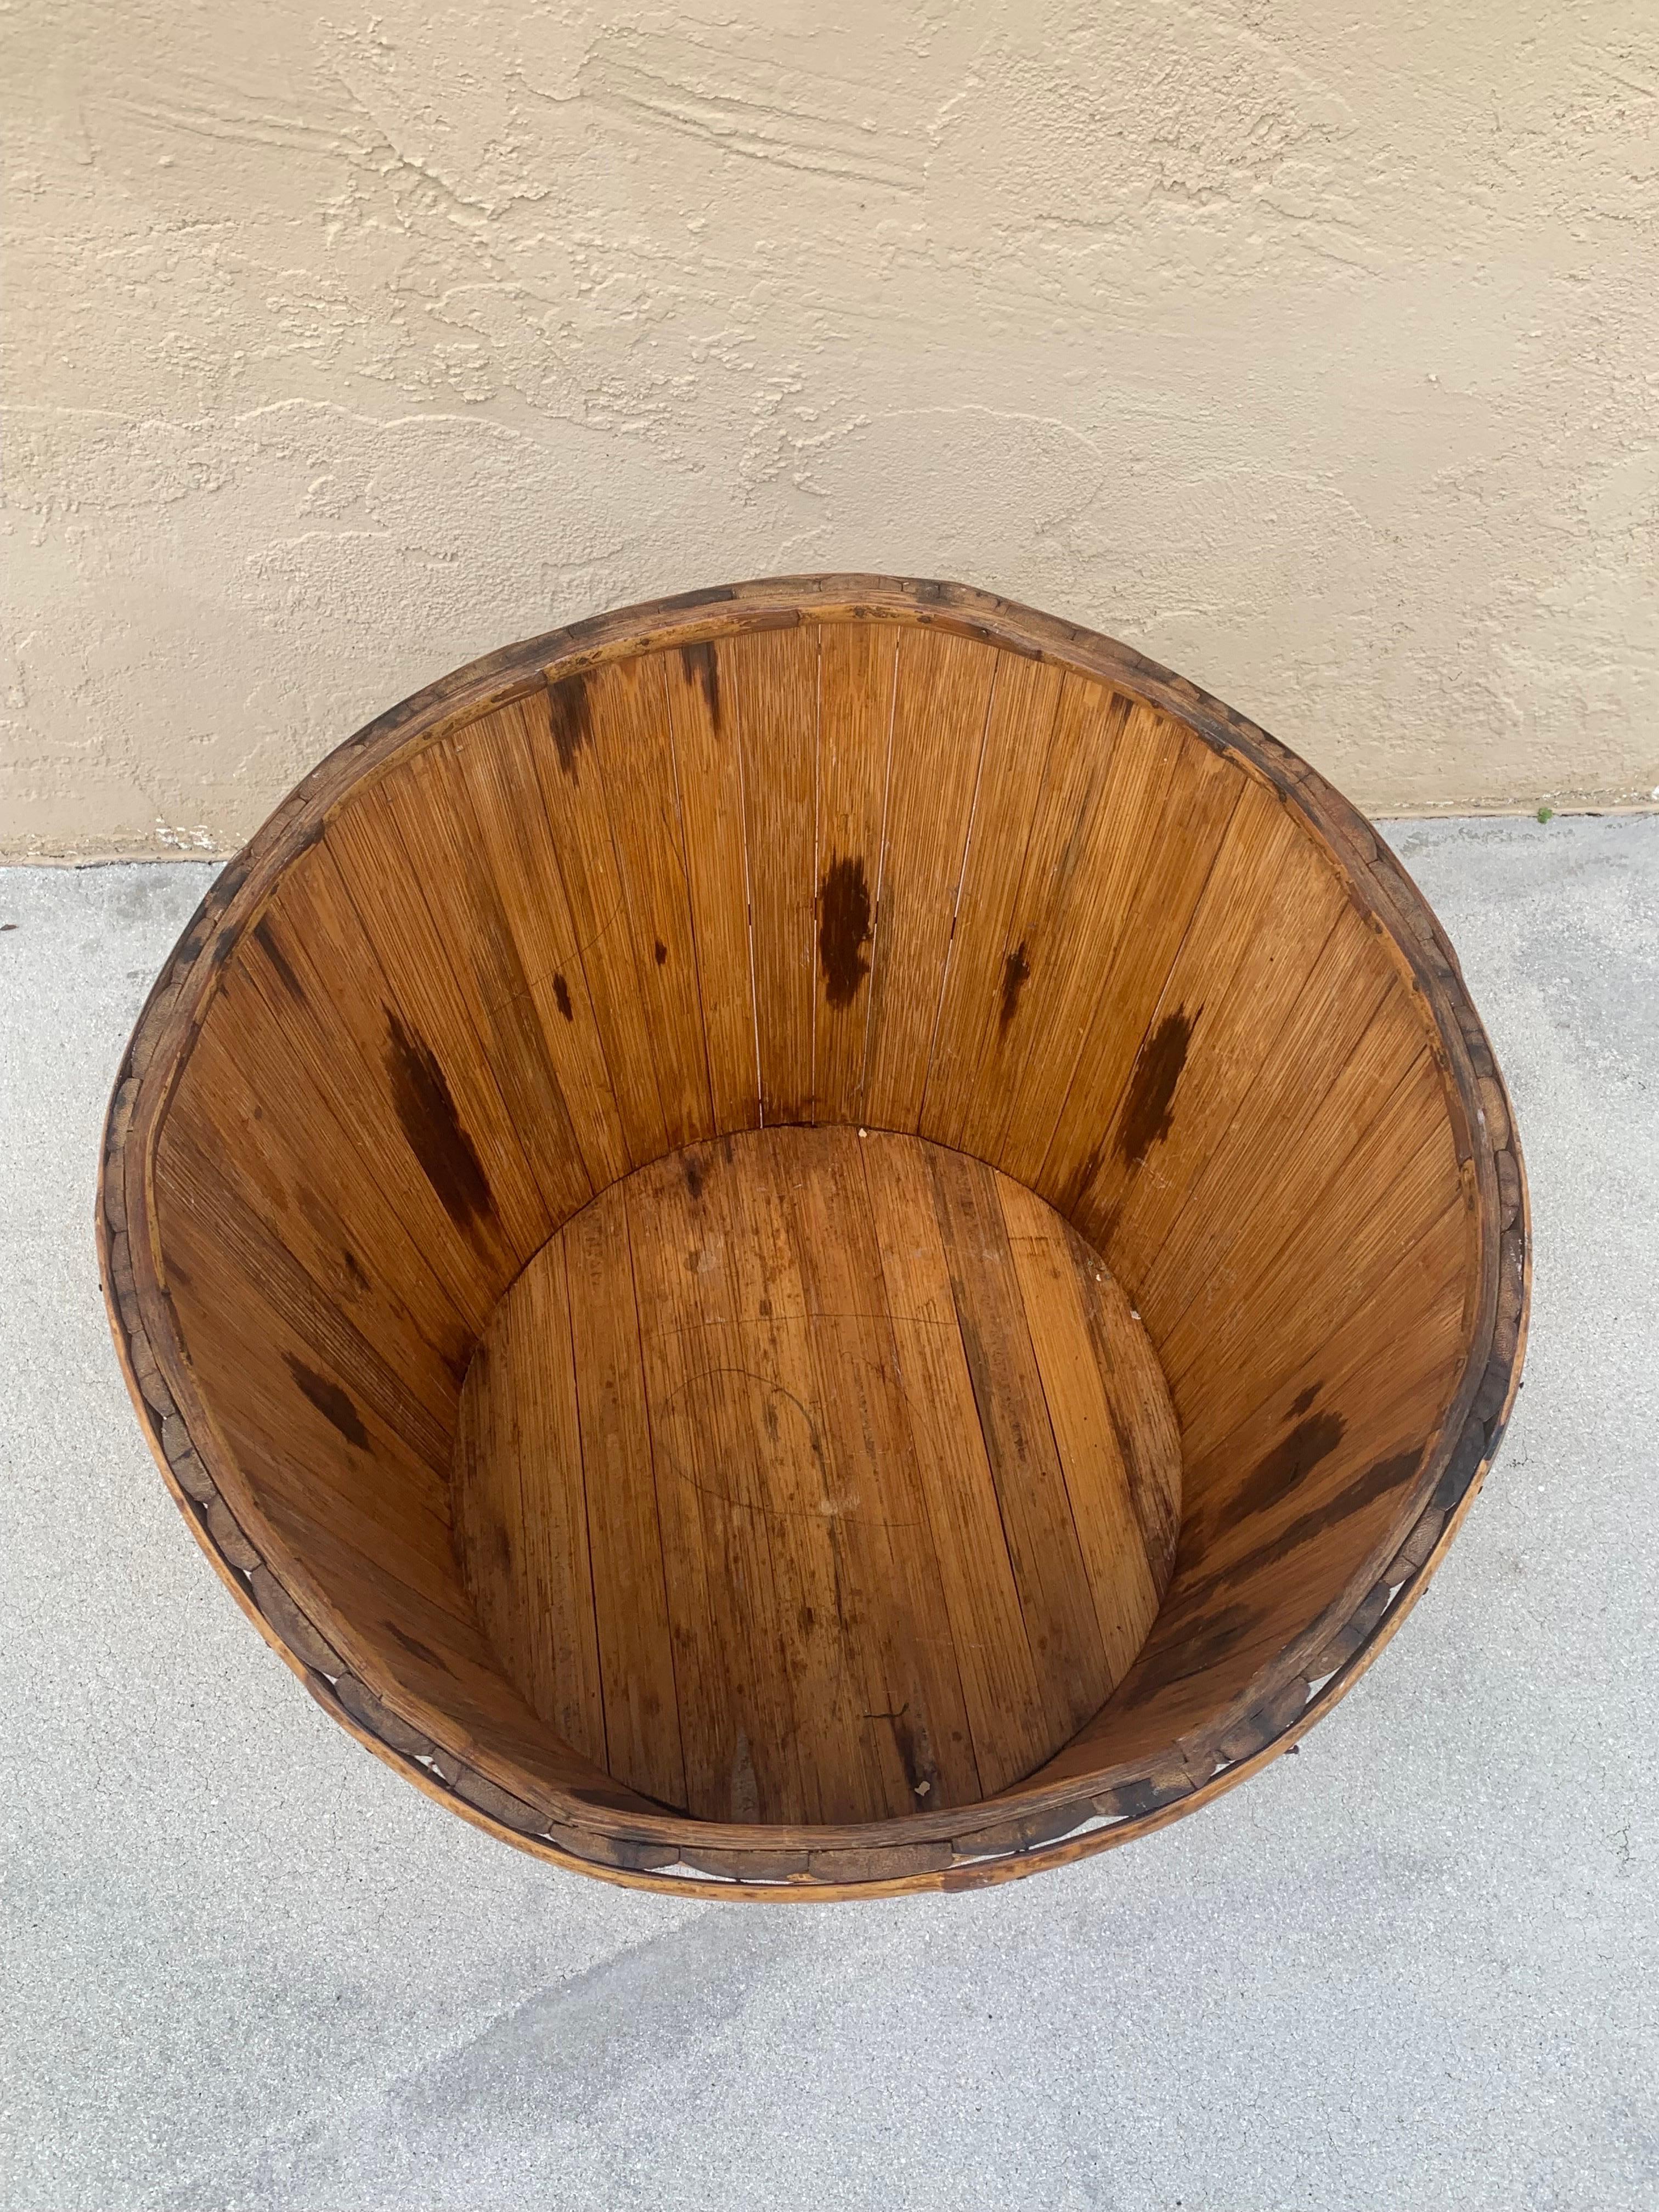 Unknown British Colonial Planter For Sale